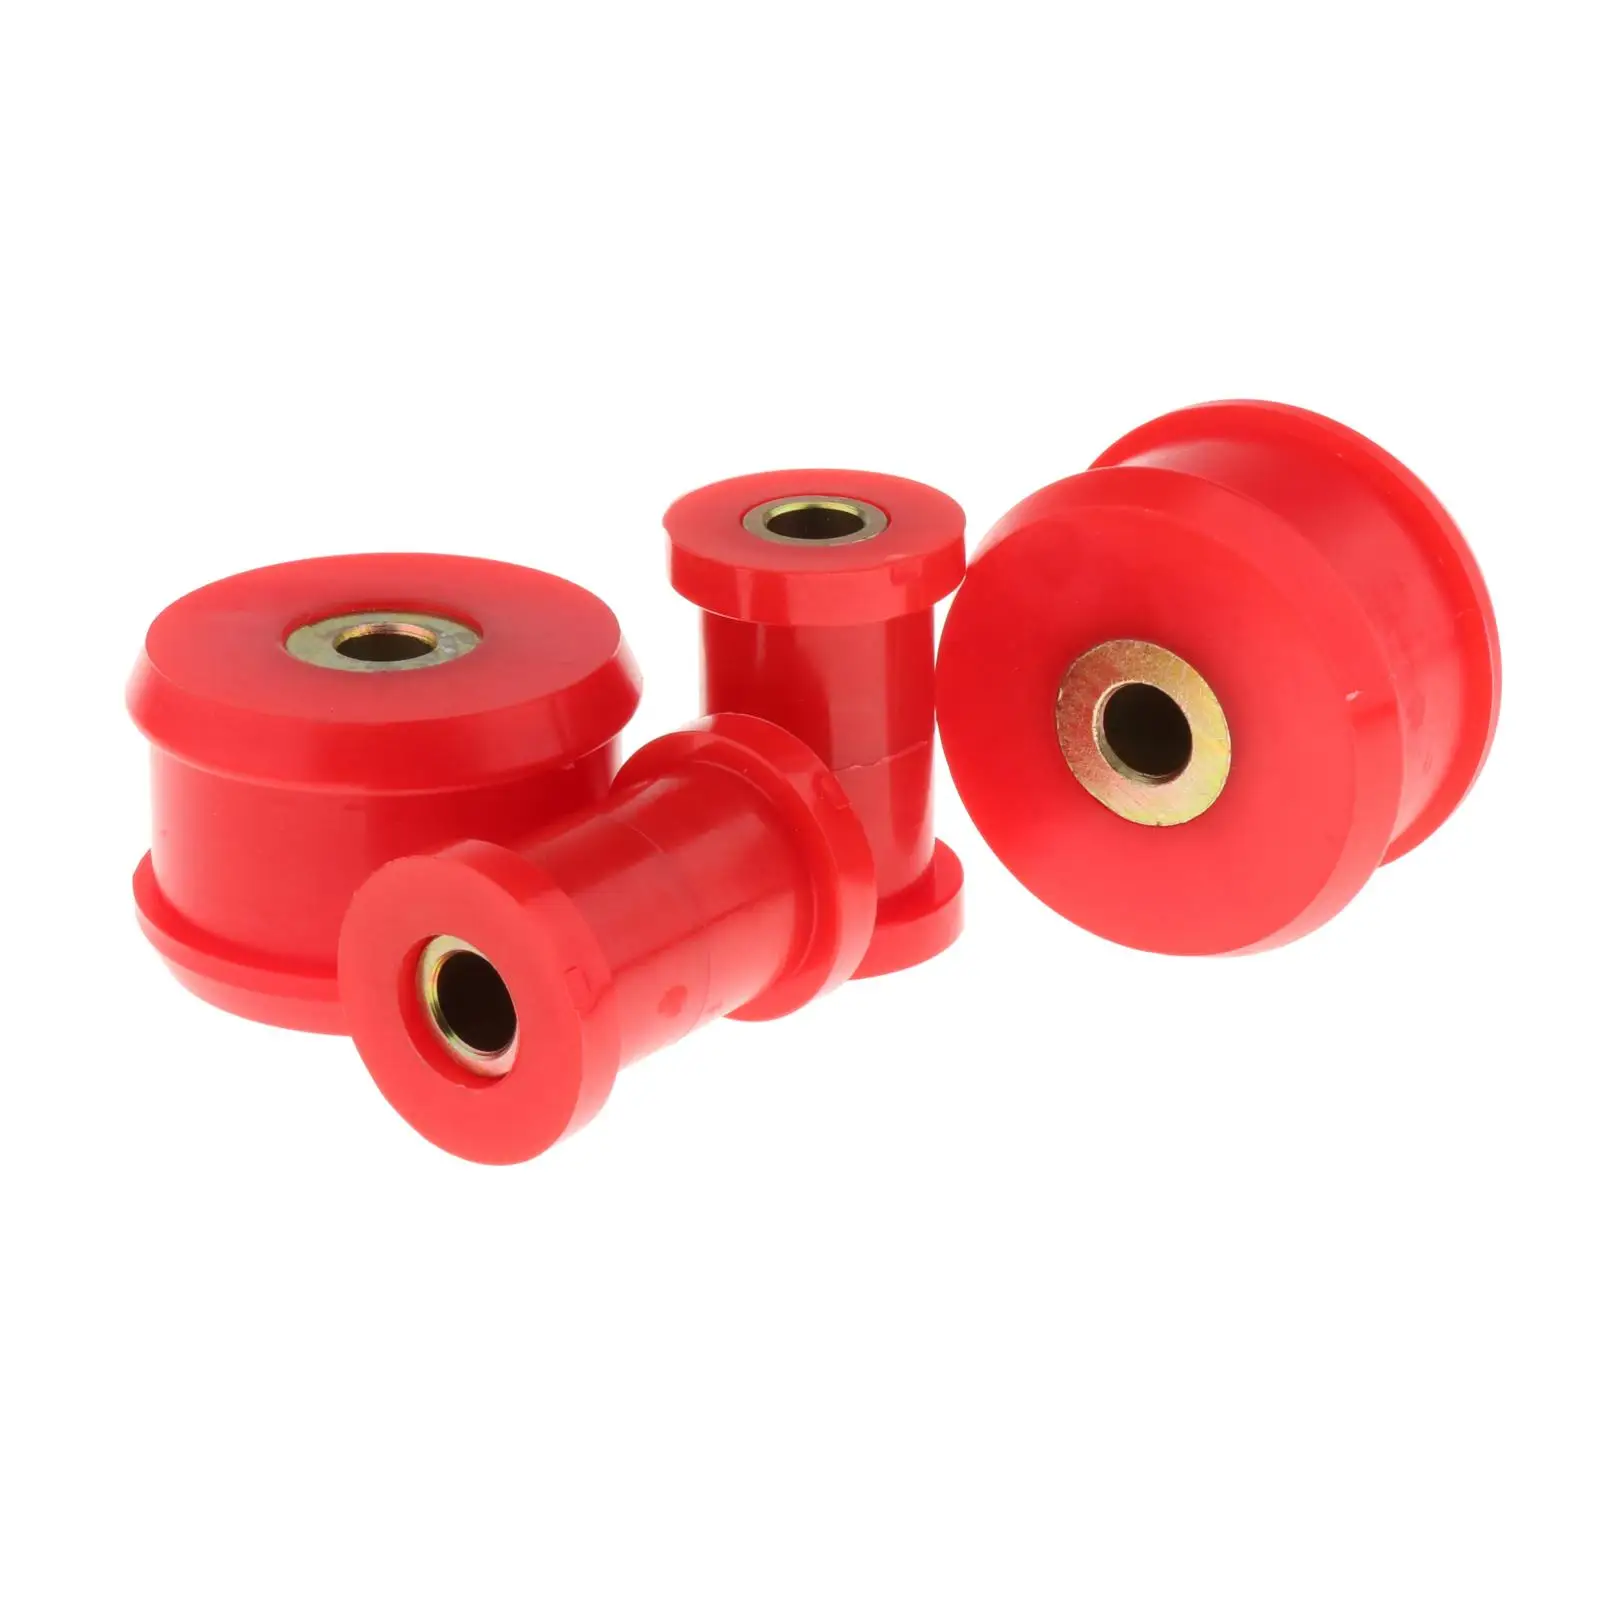 Automotive Front Control Arm Bushing Kit Red for VW Beetle MK4 1998 1999 2000 2001 2002 2003 2004 2005 2006